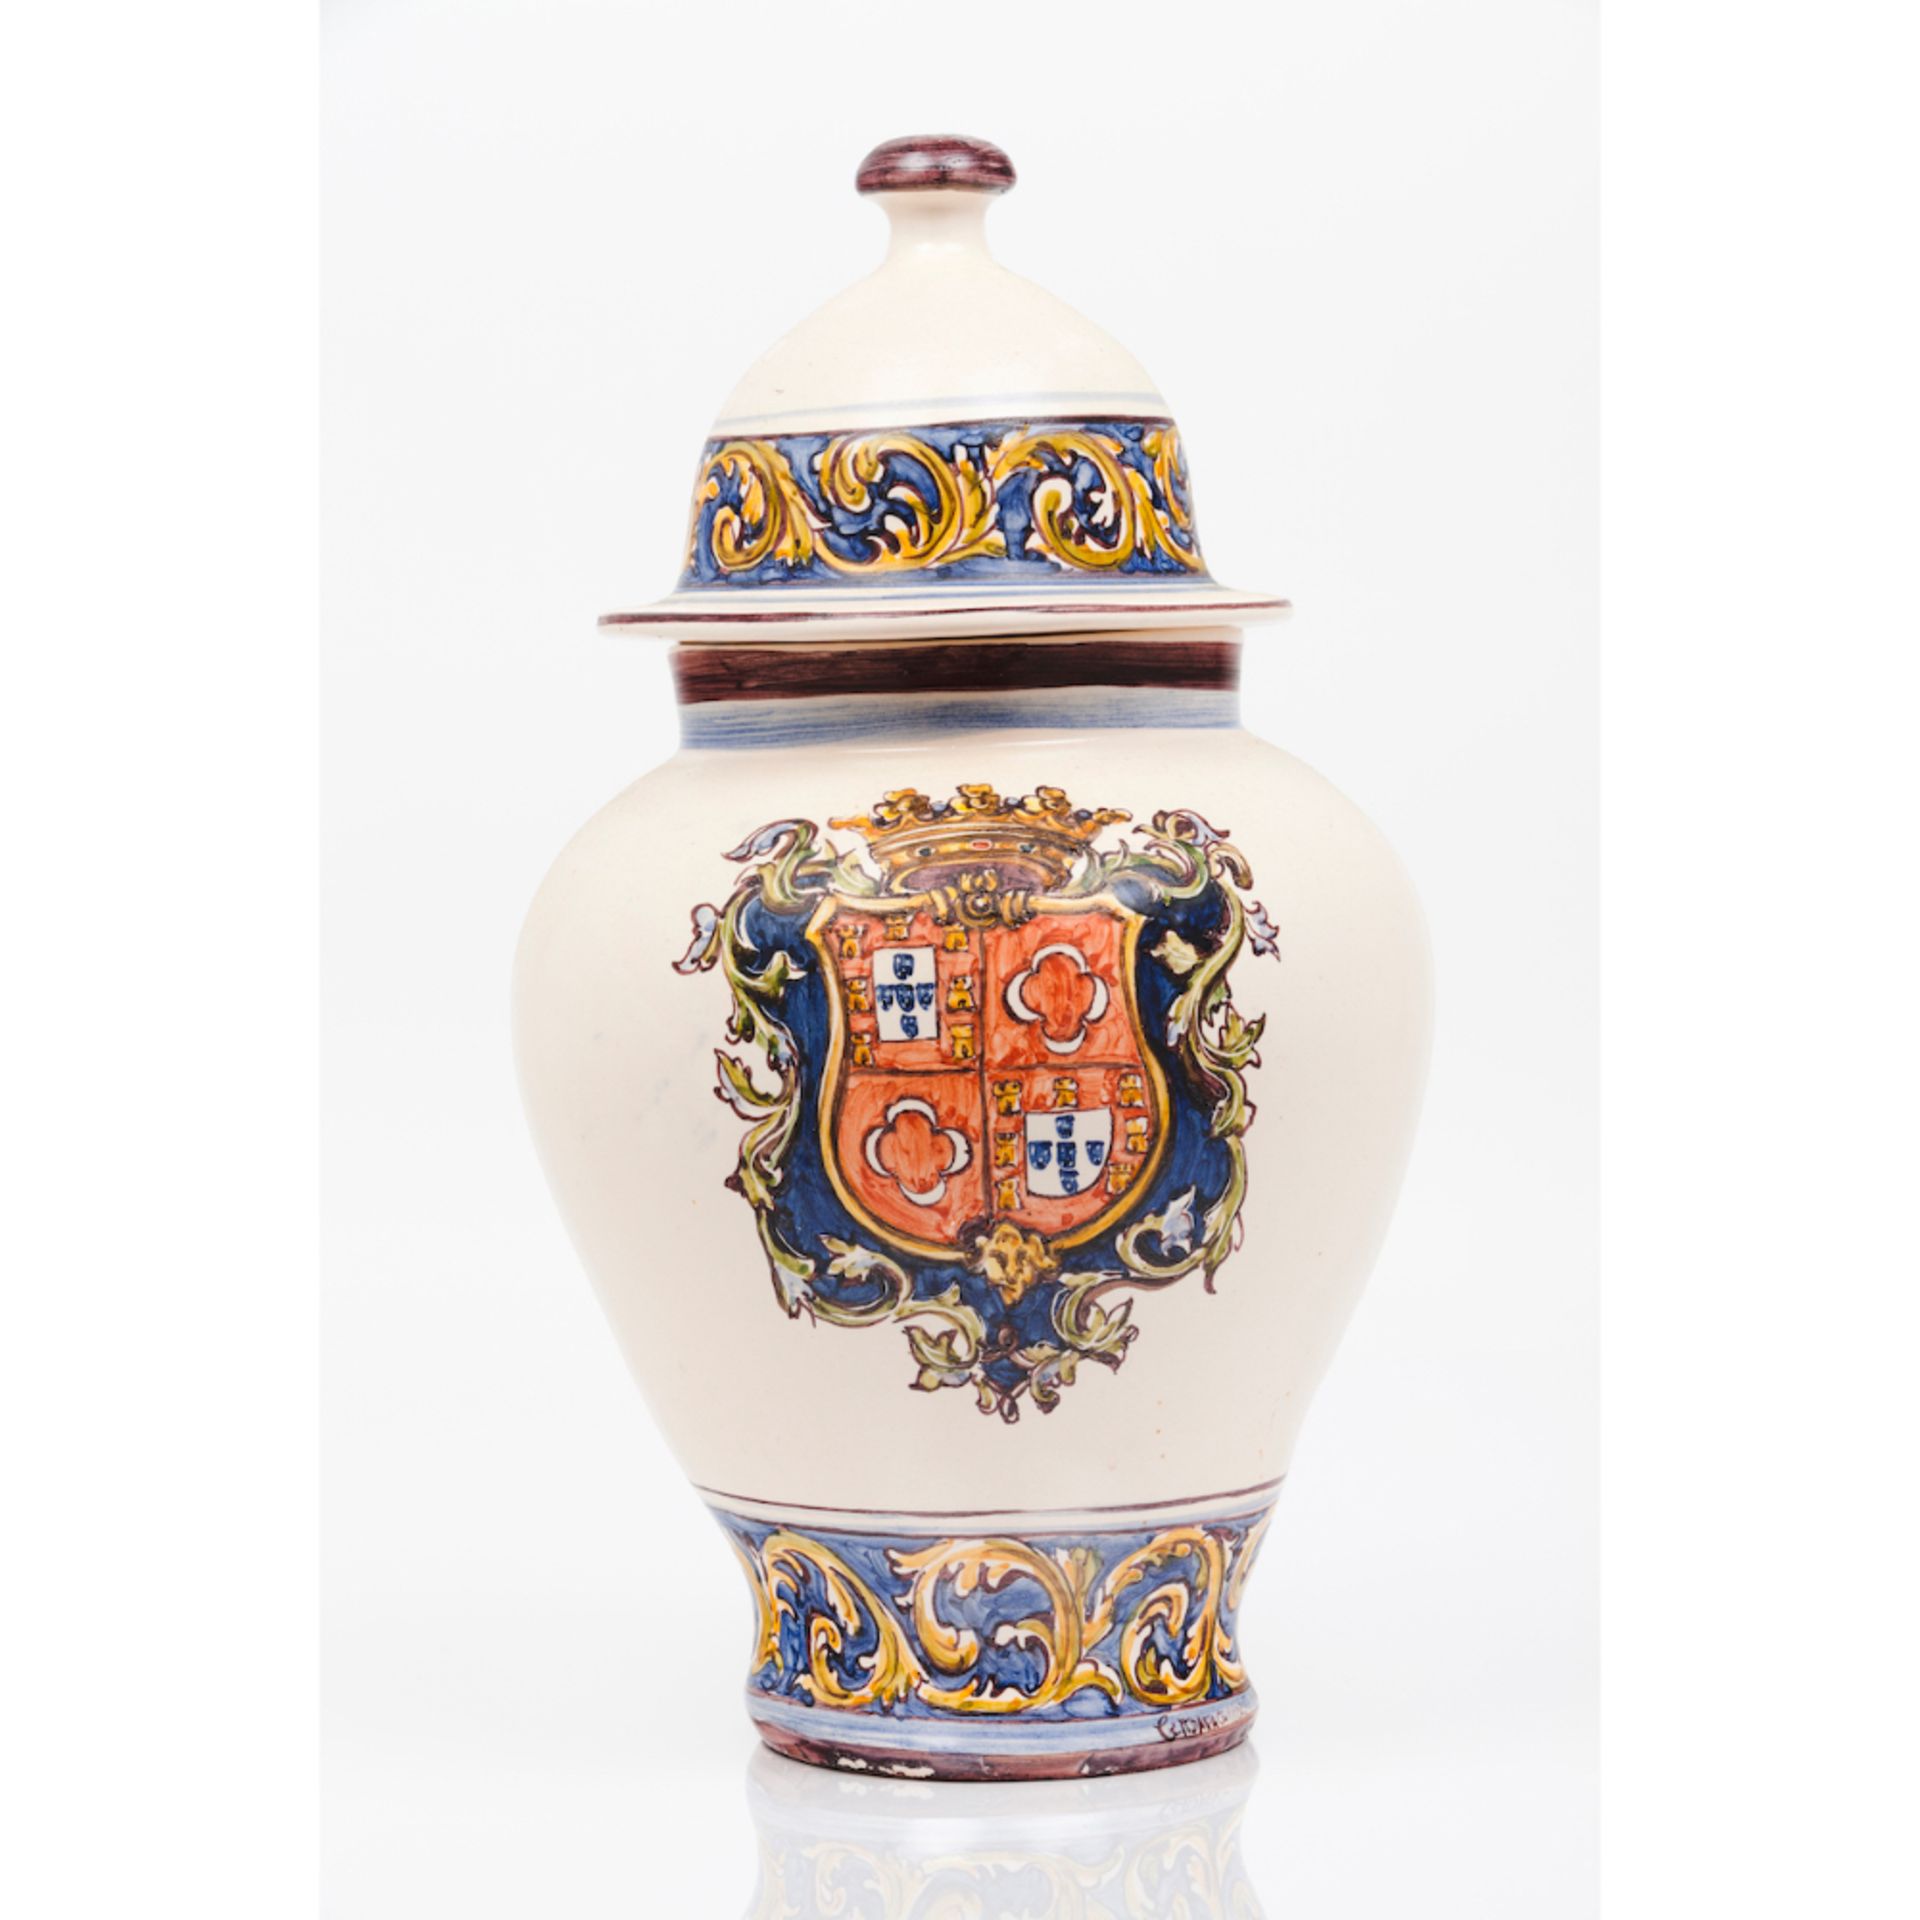 A pot with coverPainted ceramics Polychrome decoration with the Duke of Palmela heraldic shield